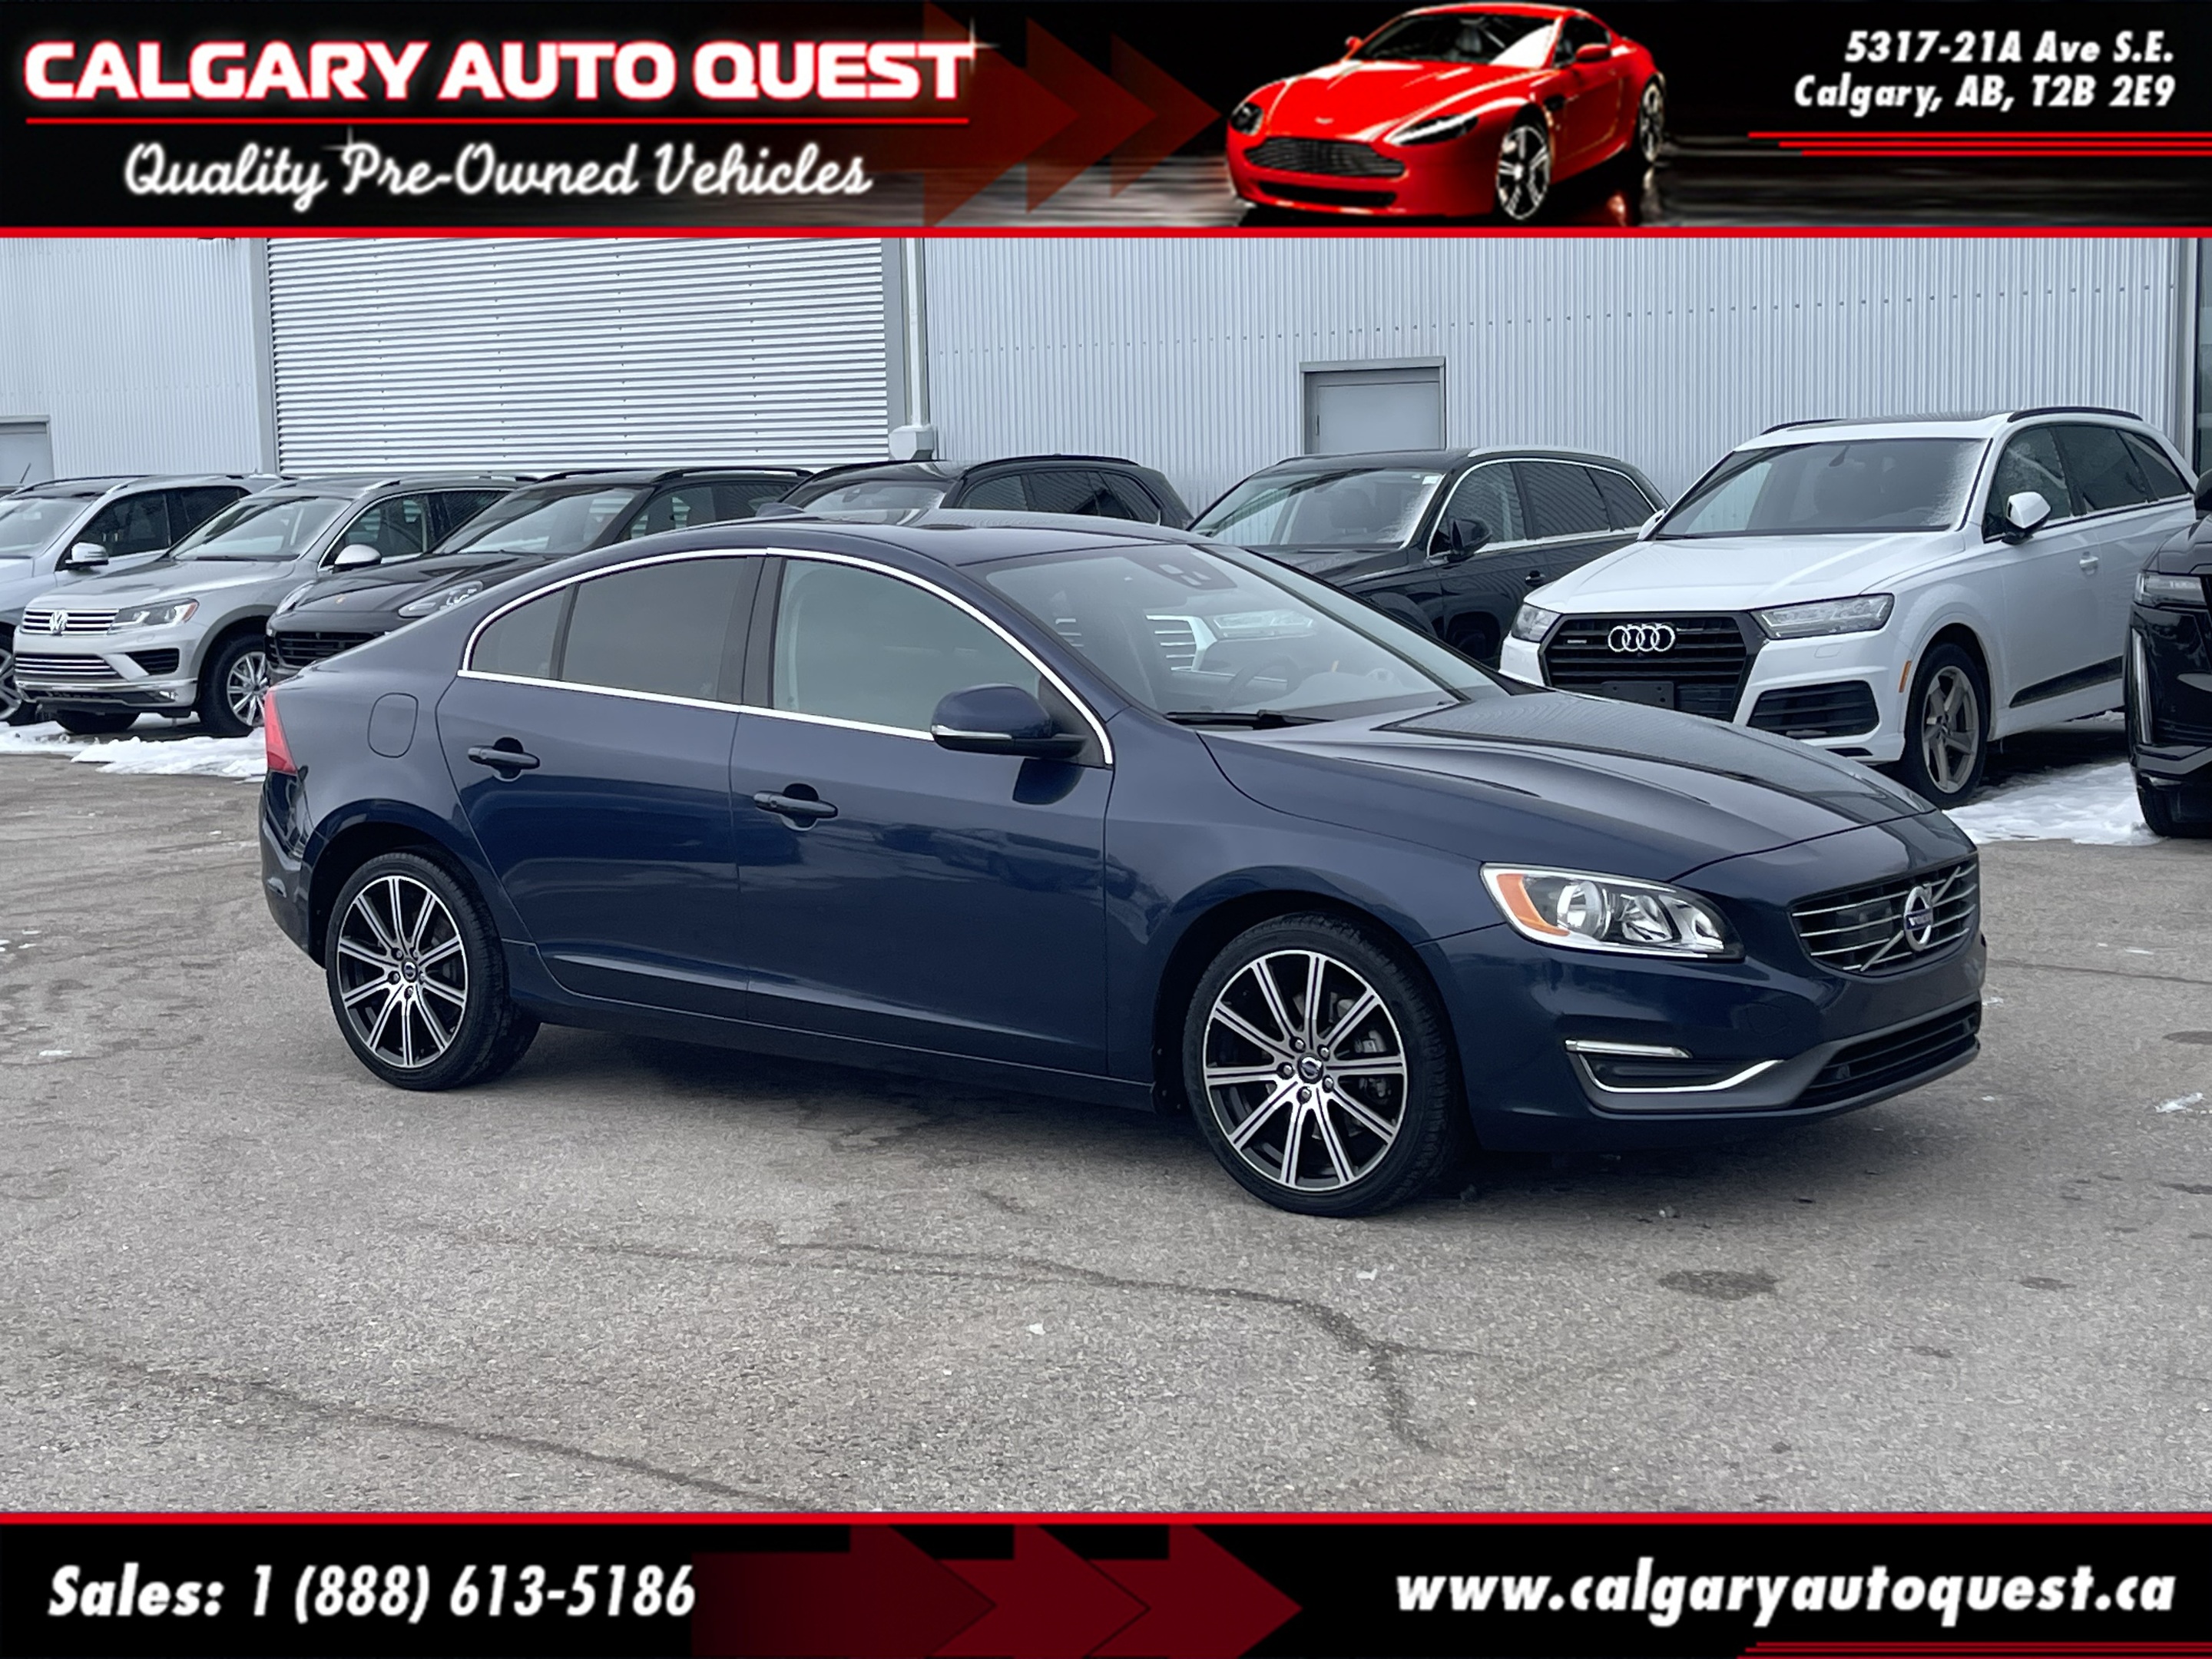 2014 Volvo S60 4dr Sdn T5 Premier Plus AWD B.CAM/LEATHER/ROOF